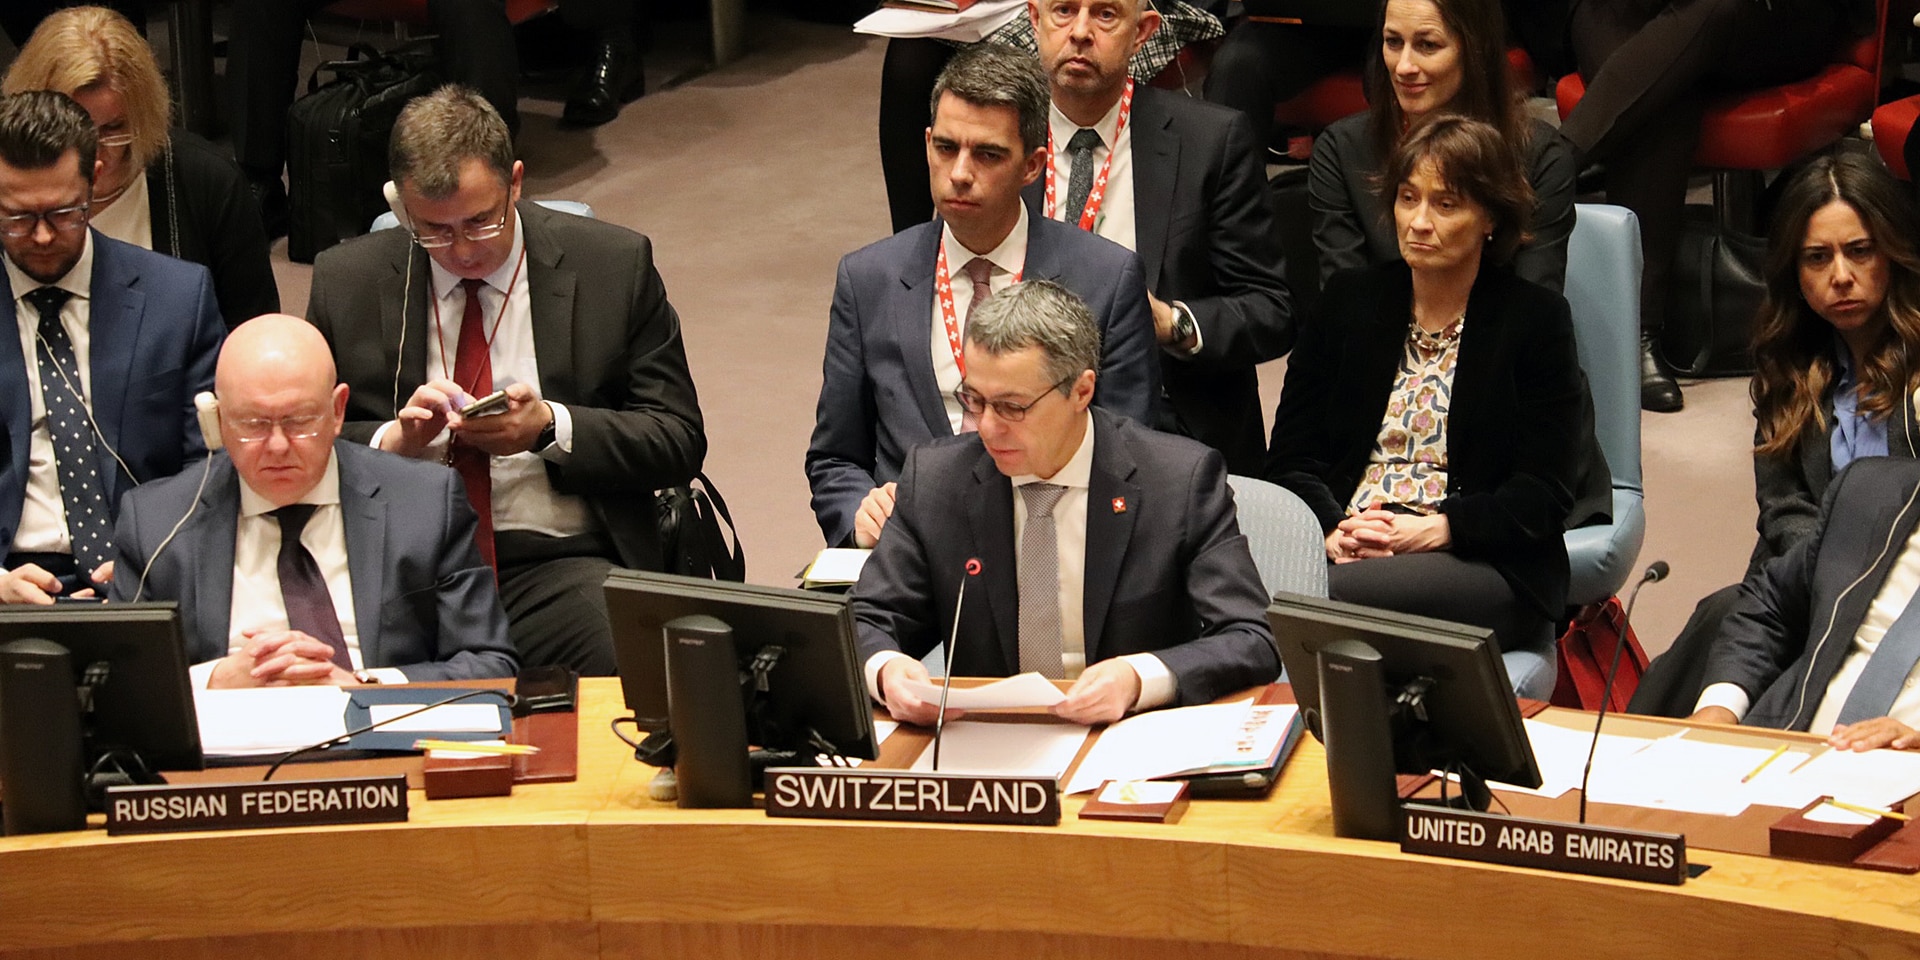 Federal Councillor Cassis speaks at the horseshoe-shaped table of the UN Security Council.